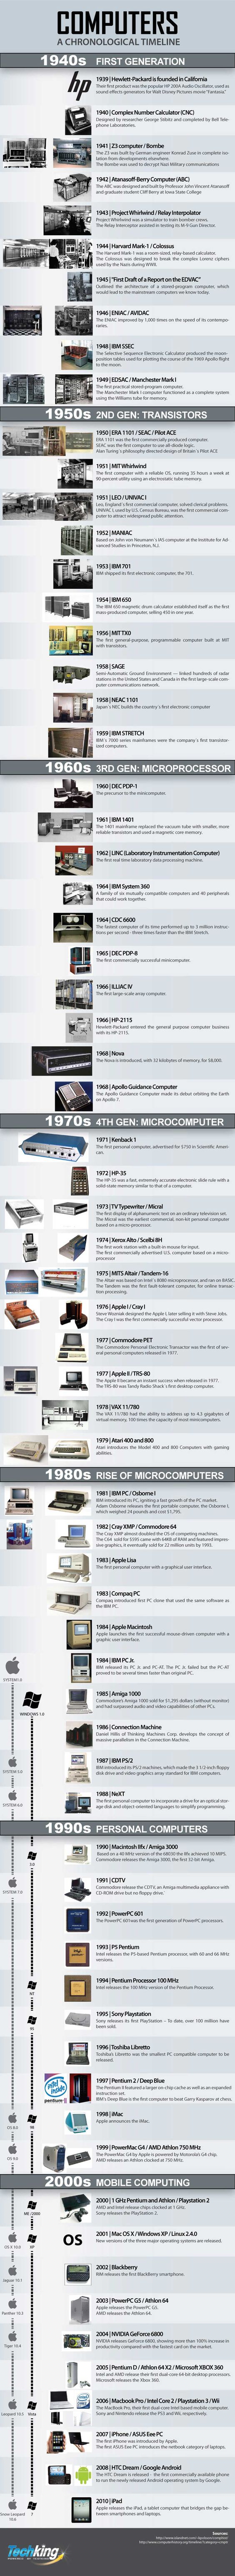 Computers: An Awesome Chronological Timeline #infographic